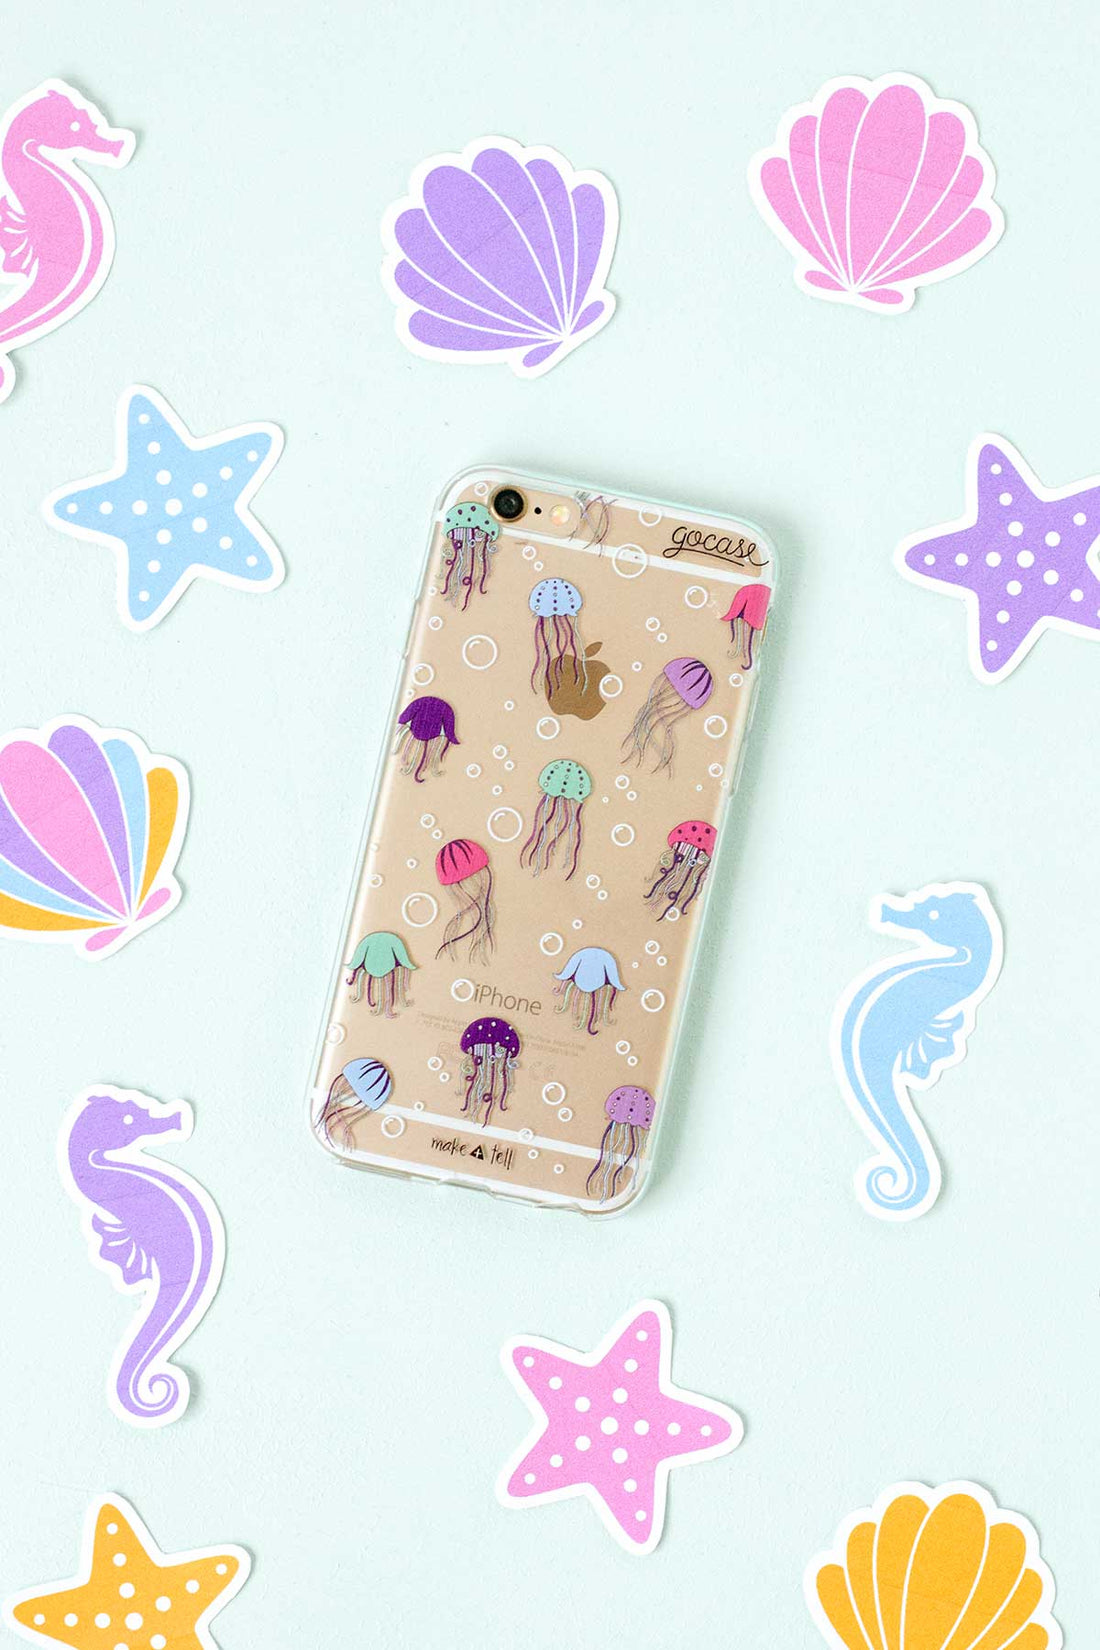 Jellyfish phone case now in store!